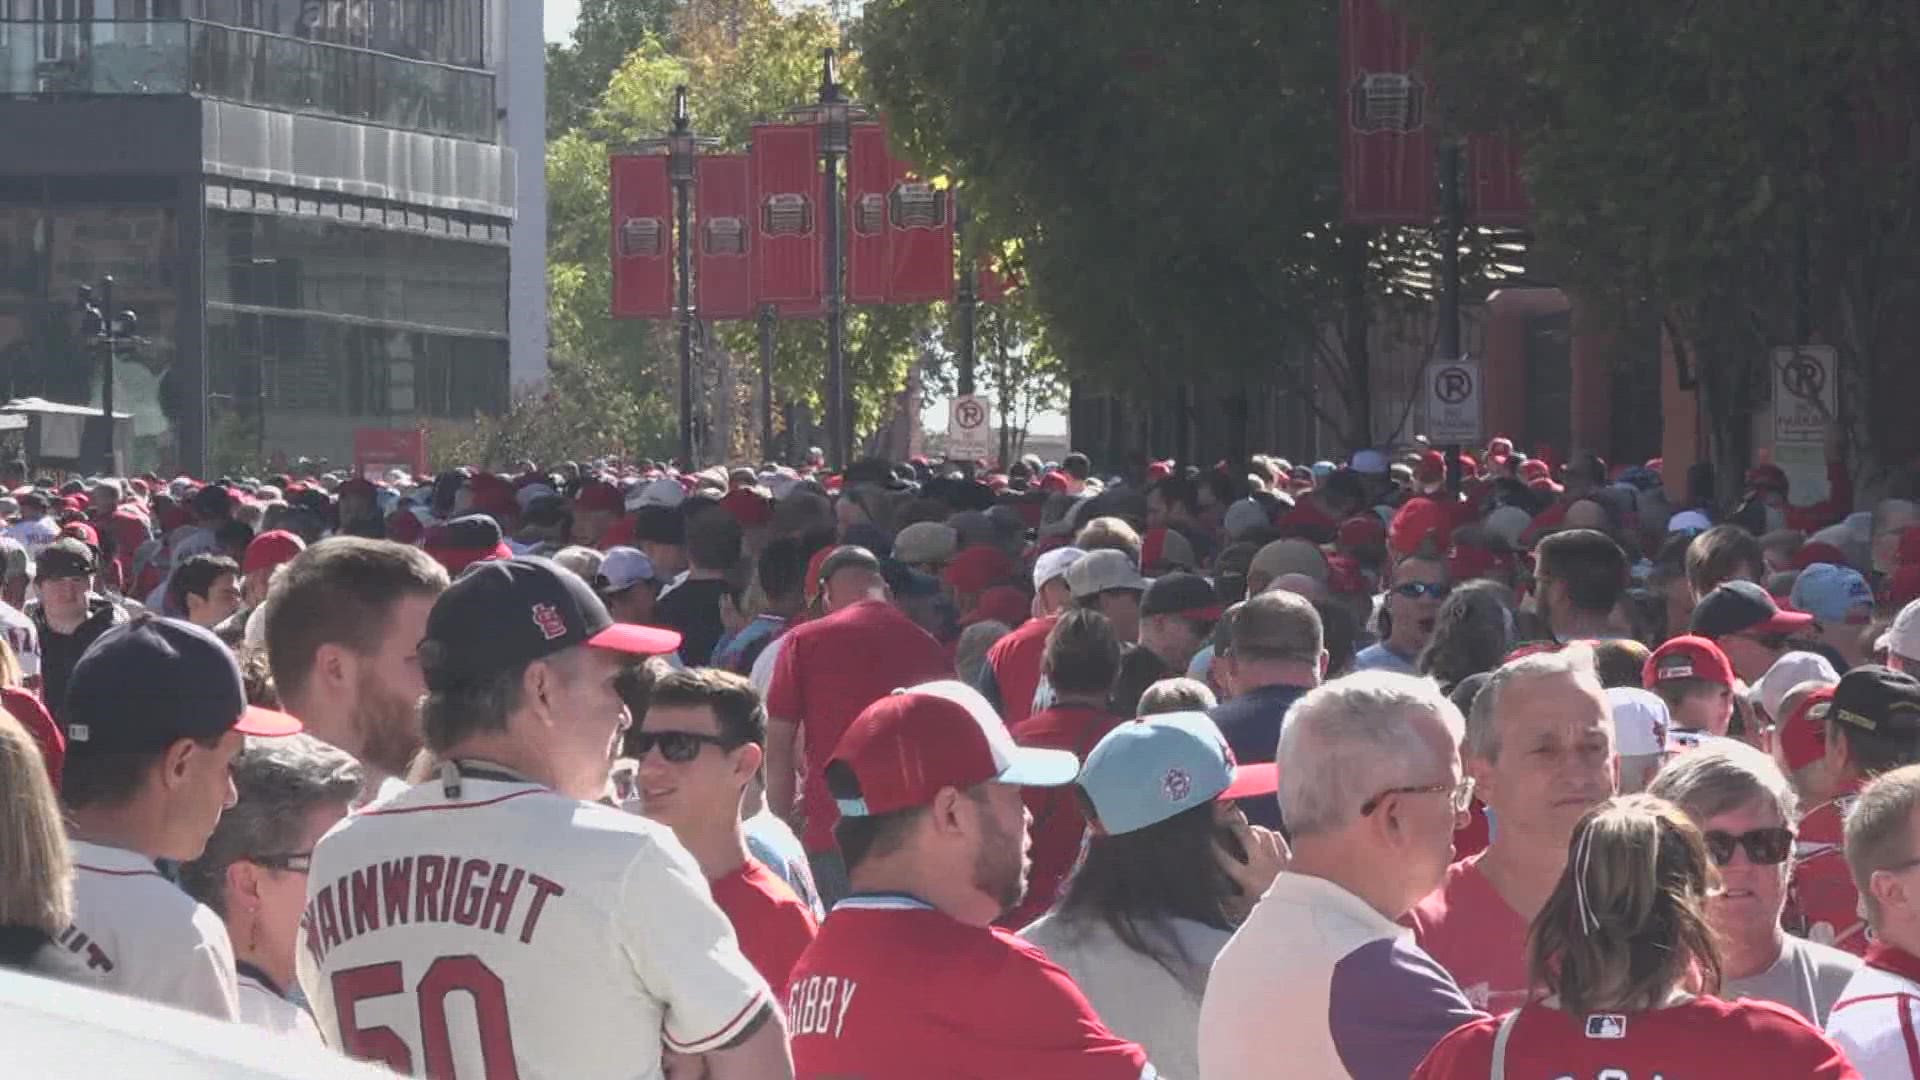 Arch Apparel Assistant Manager Matthew Sanders said the magic of Cardinals baseball has people running to the racks. They’ve had one of their biggest weekends.